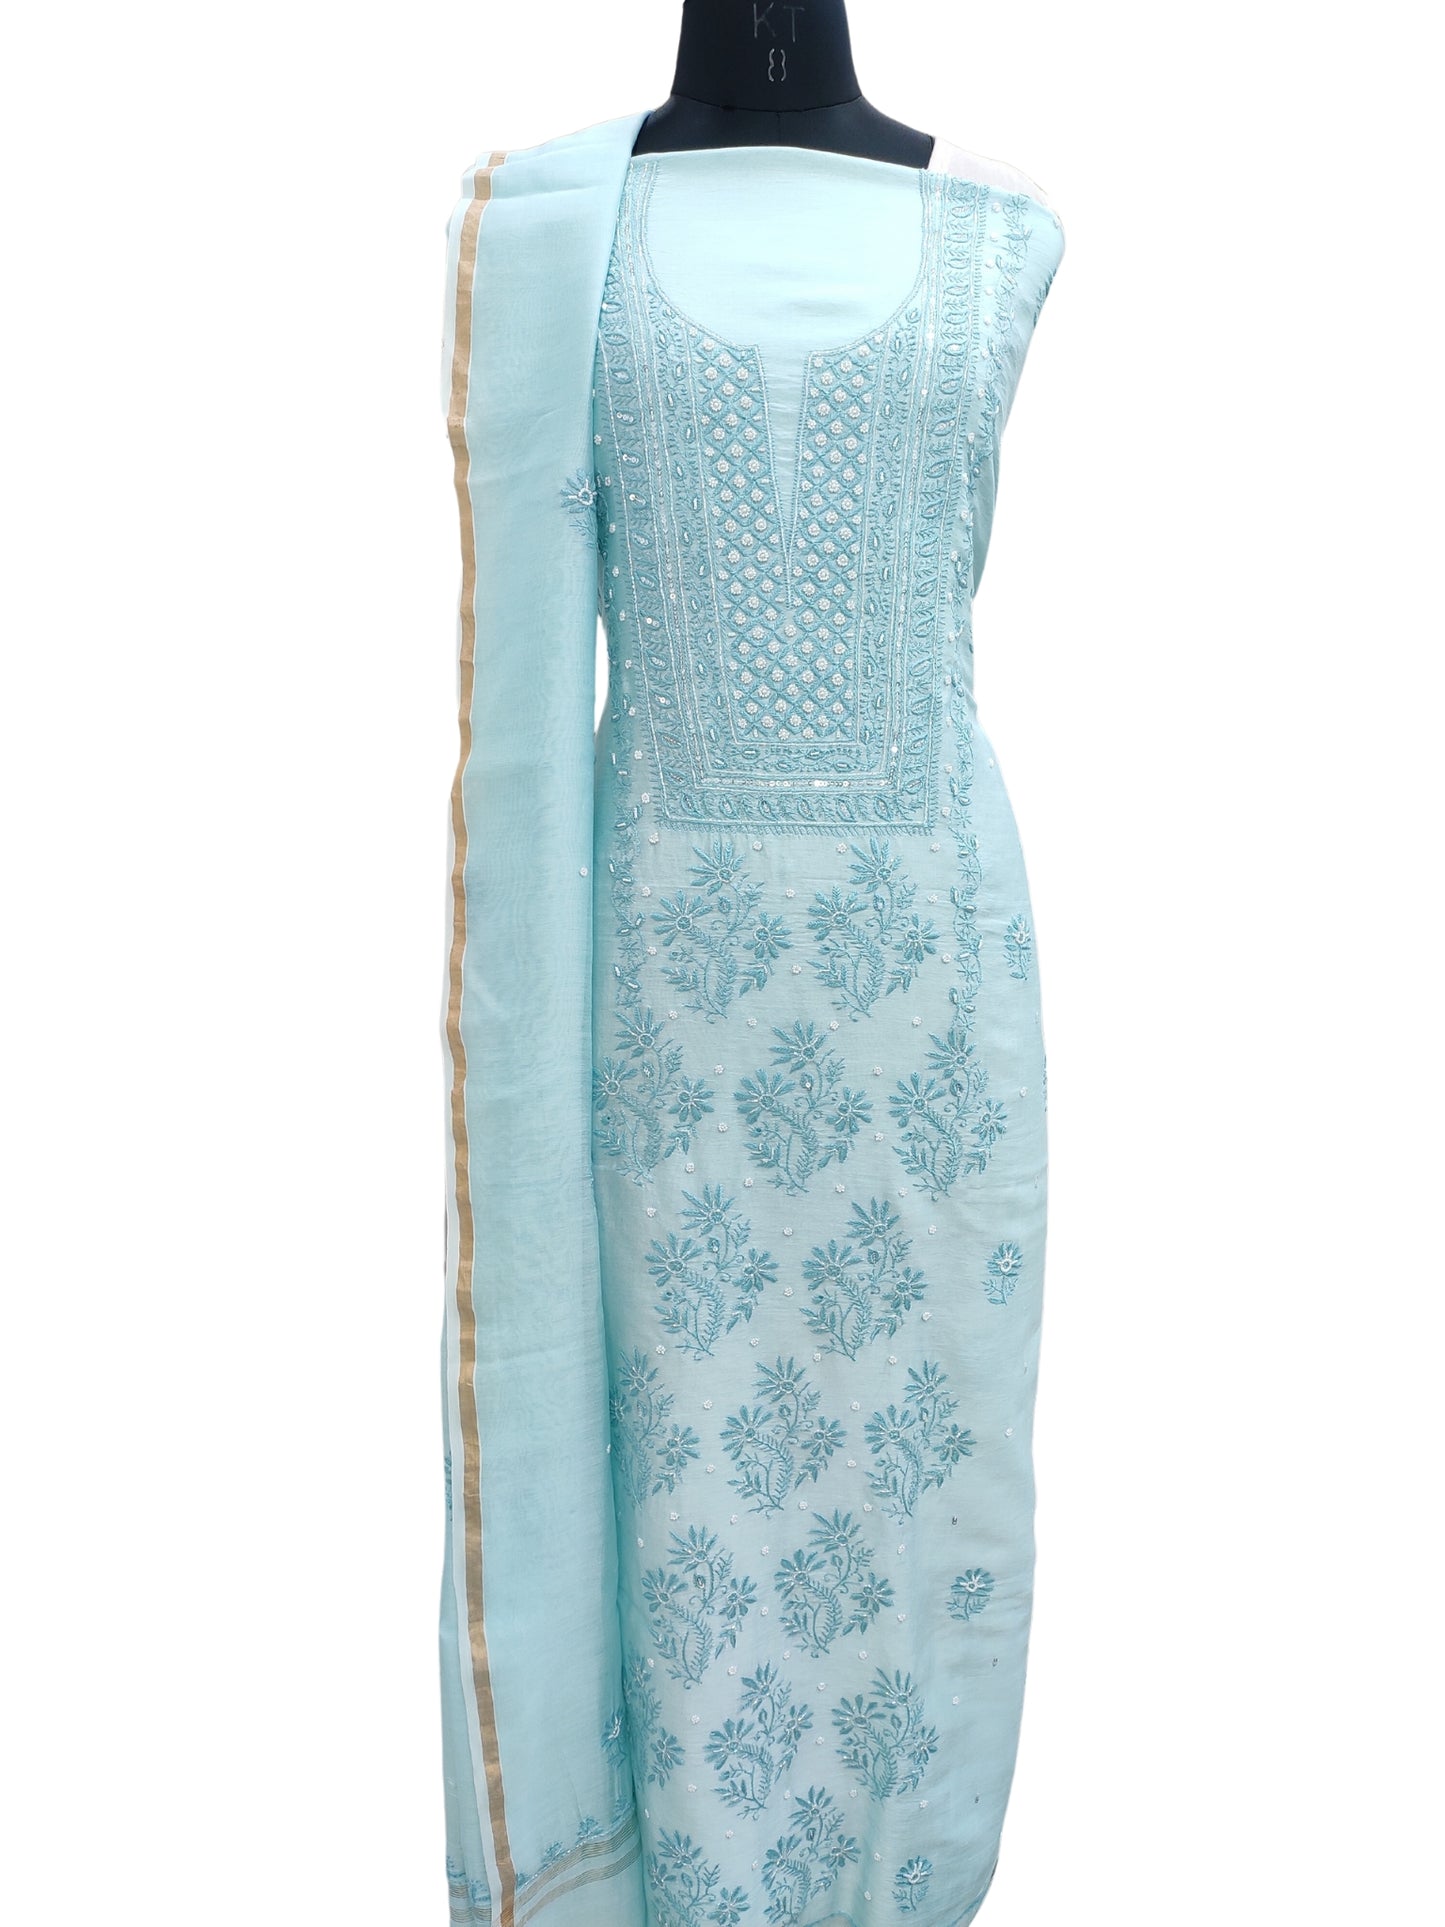 Shyamal Chikan Hand Embroidered Blue Chanderi Lucknowi Chikankari Unstitched Suit Piece with Pearl & Sequin Work (Set of 2) - S20481